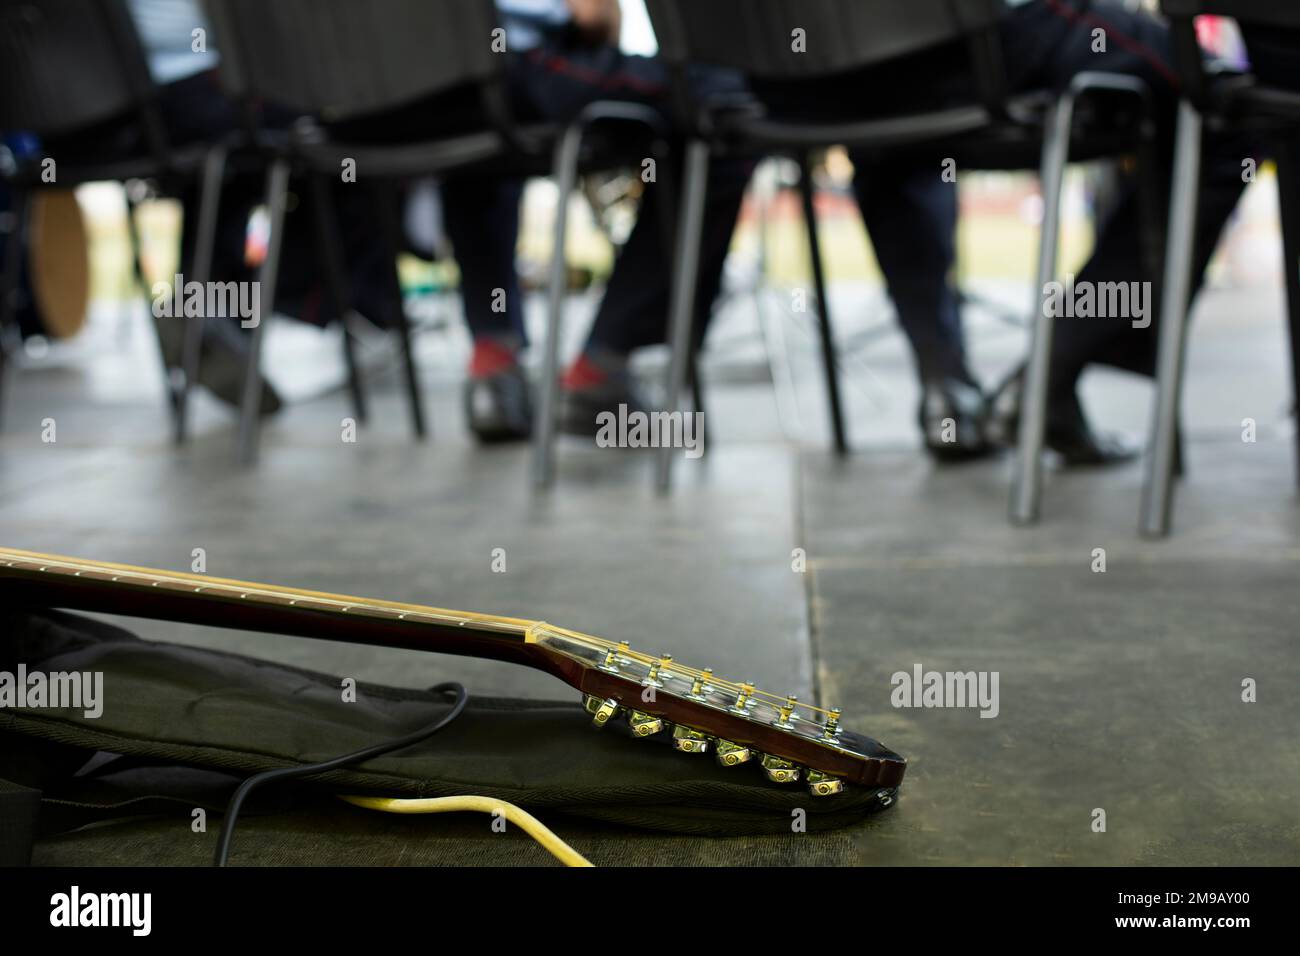 Guitar on stage. Musical instrument at performance. Guitar neck and case. Details of concert. Stock Photo